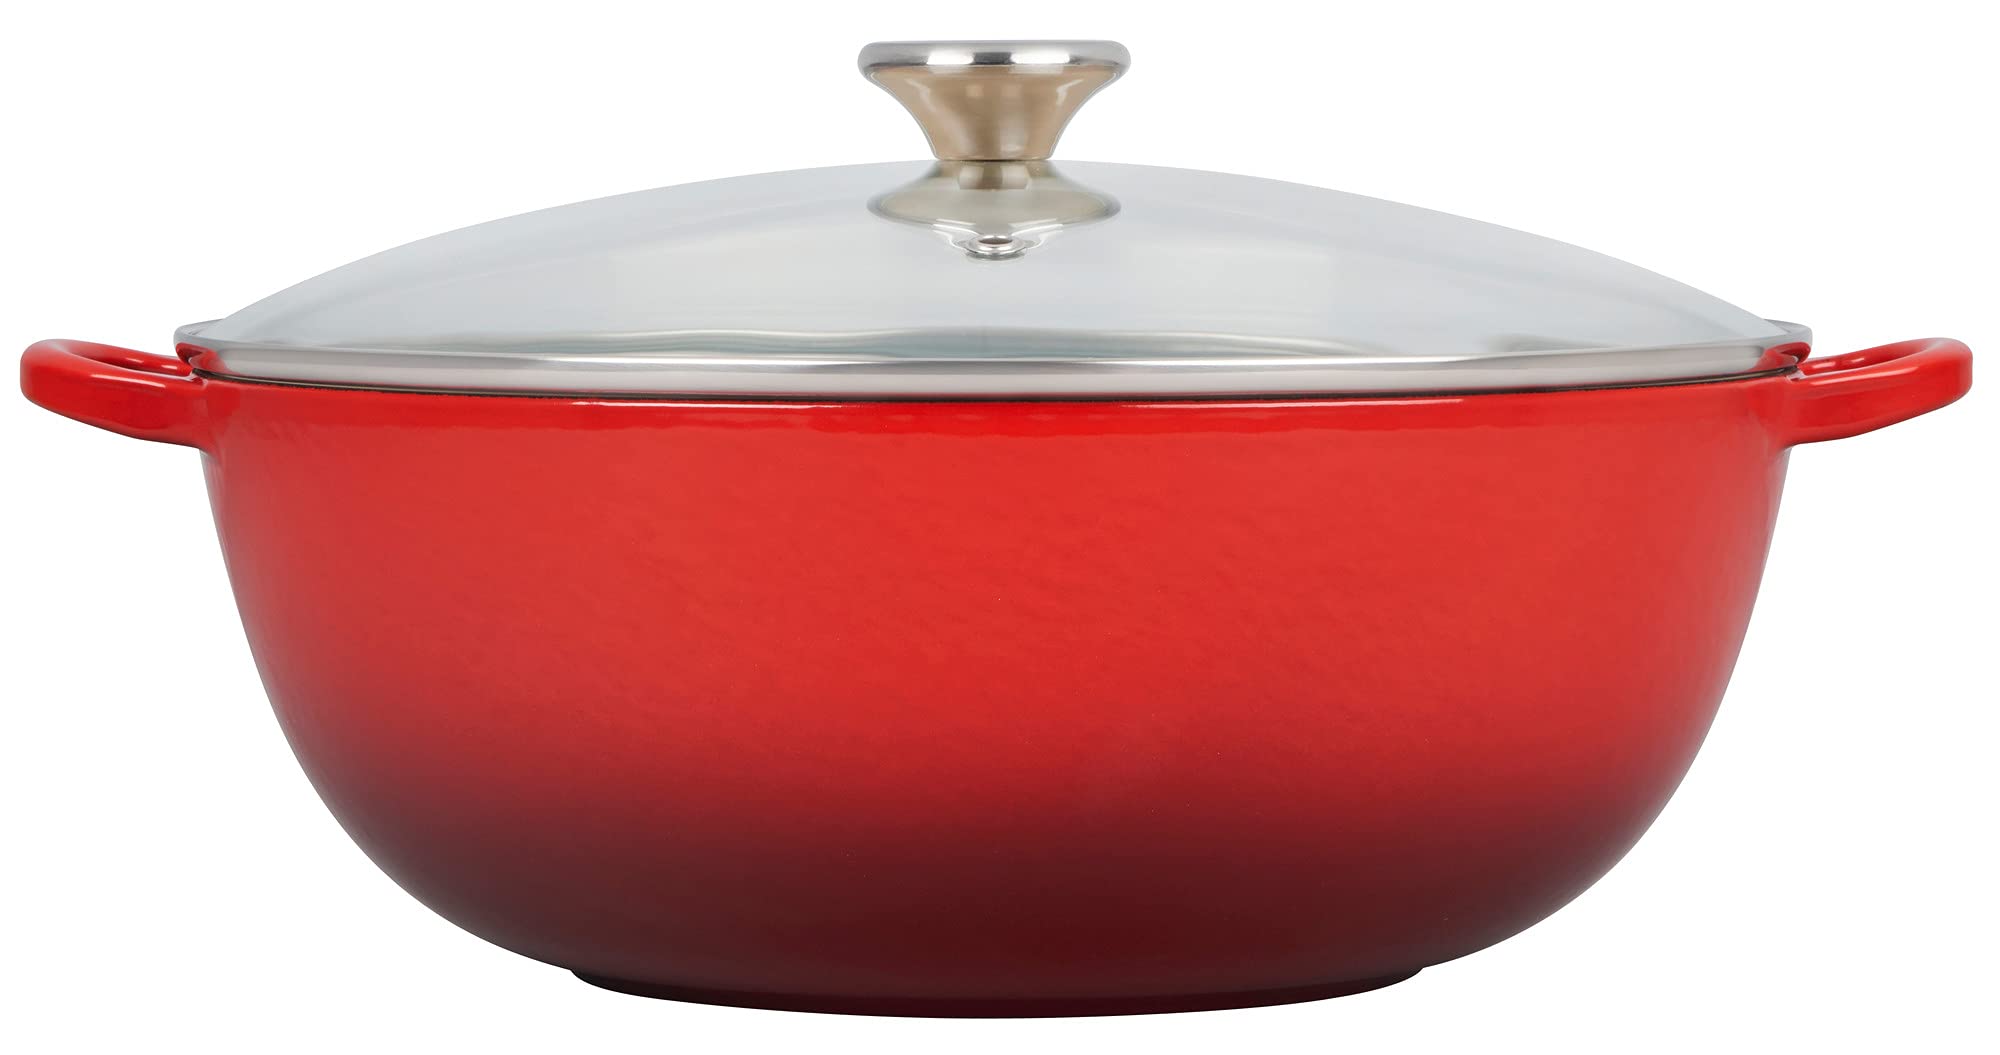 7.5-Quart Le Creuset Enameled Cast Iron Chef's Oven with Glass Lid (Cerise) $176 + Free Shipping